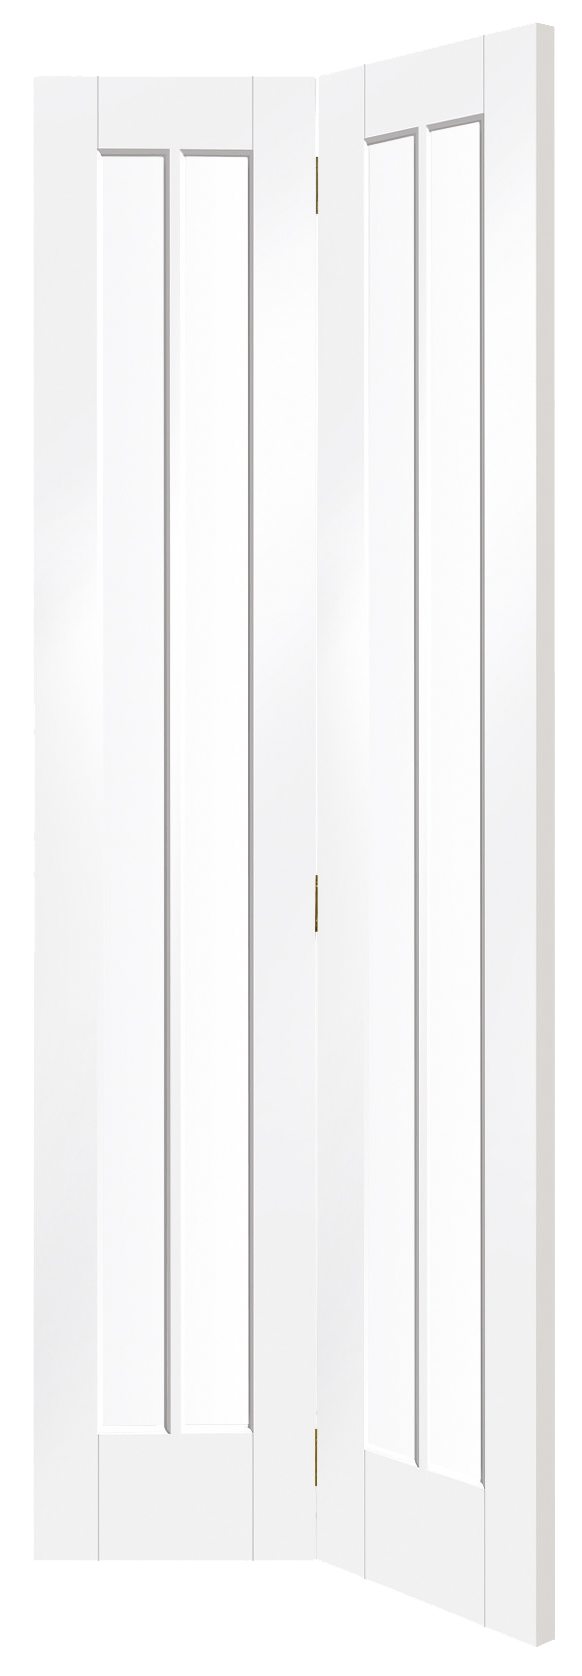 White Primed Worcester Internal Bi-Fold with Clear Glass – White Primed, 1981 x 762 x 35 mm